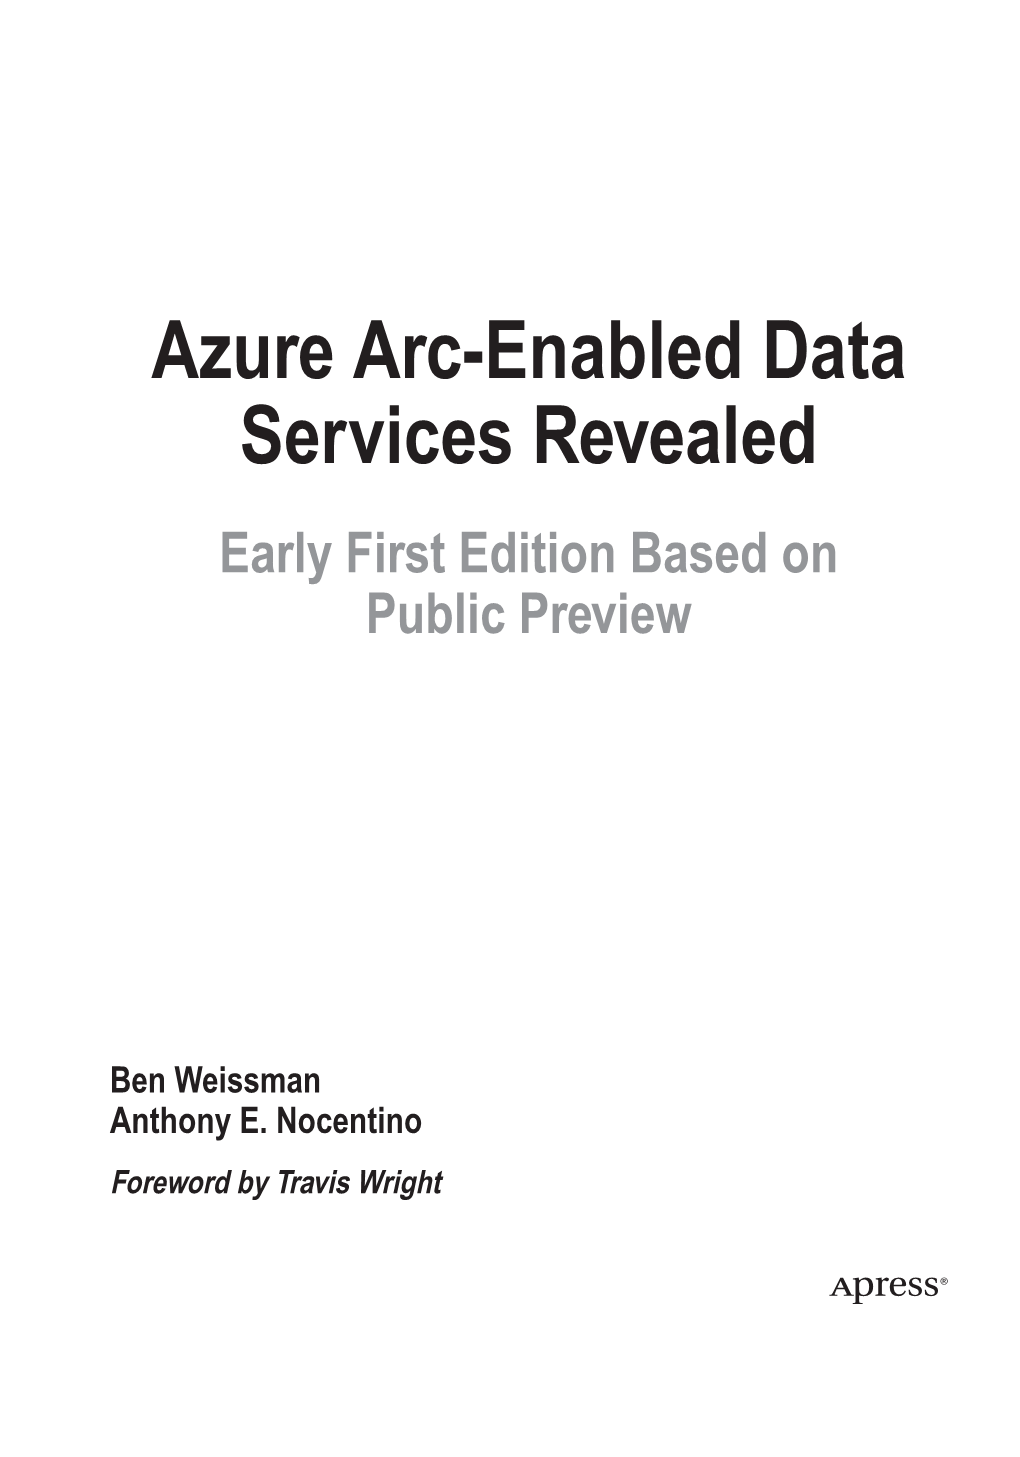 Azure Arc-Enabled Data Services Revealed Early First Edition Based on Public Preview